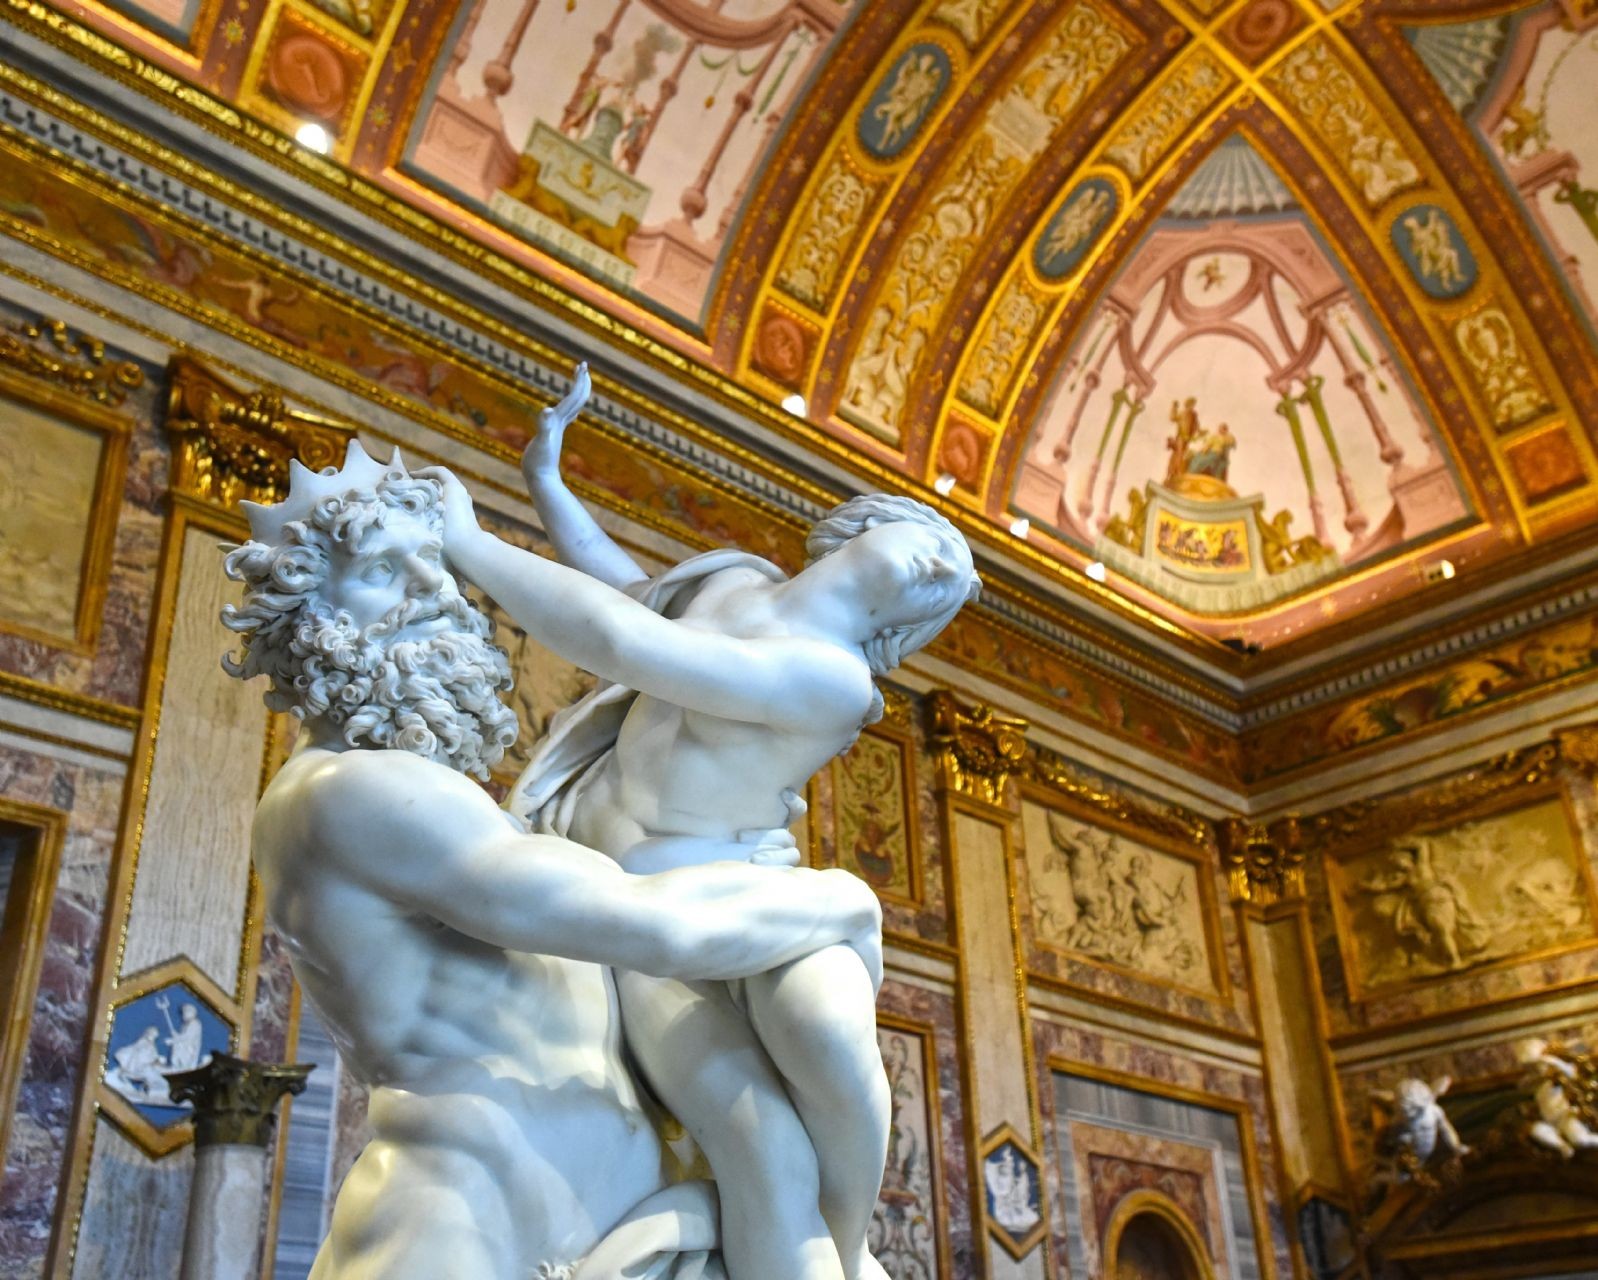 The collection at Galleria Borghese is truly stunning. Some of the highlights include Bernini's 